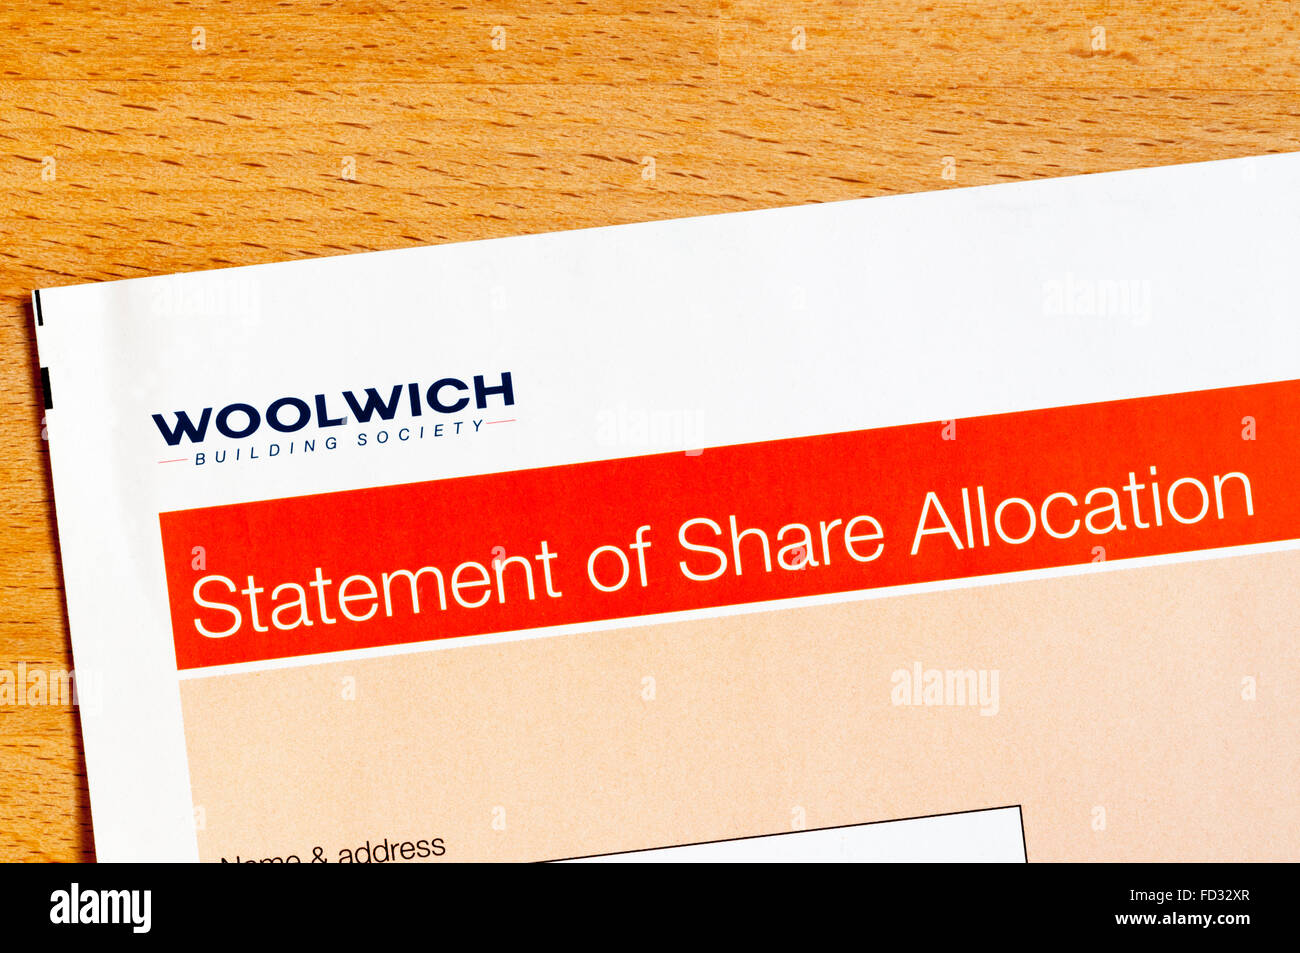 Statement of Share Allocation from Woolwich Building Society following demutualisation in 1997. Stock Photo